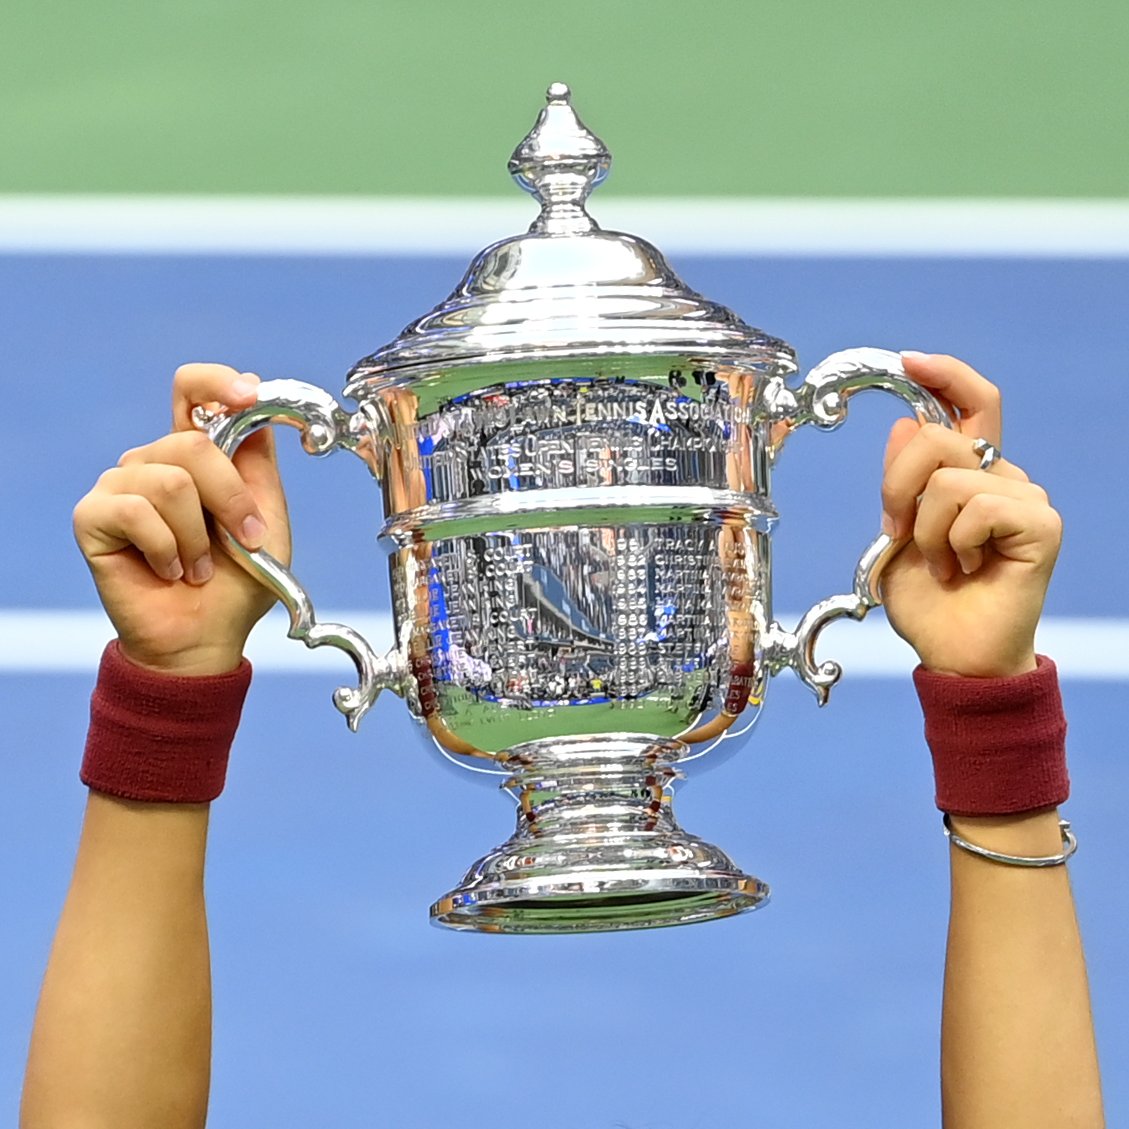 A tradition starting in 1987 to crowning today's 2021 Champion 🏆 @TiffanyAndCo silversmiths is proud to annually craft the trophy for the #USOpen Women’s Singles Championship.